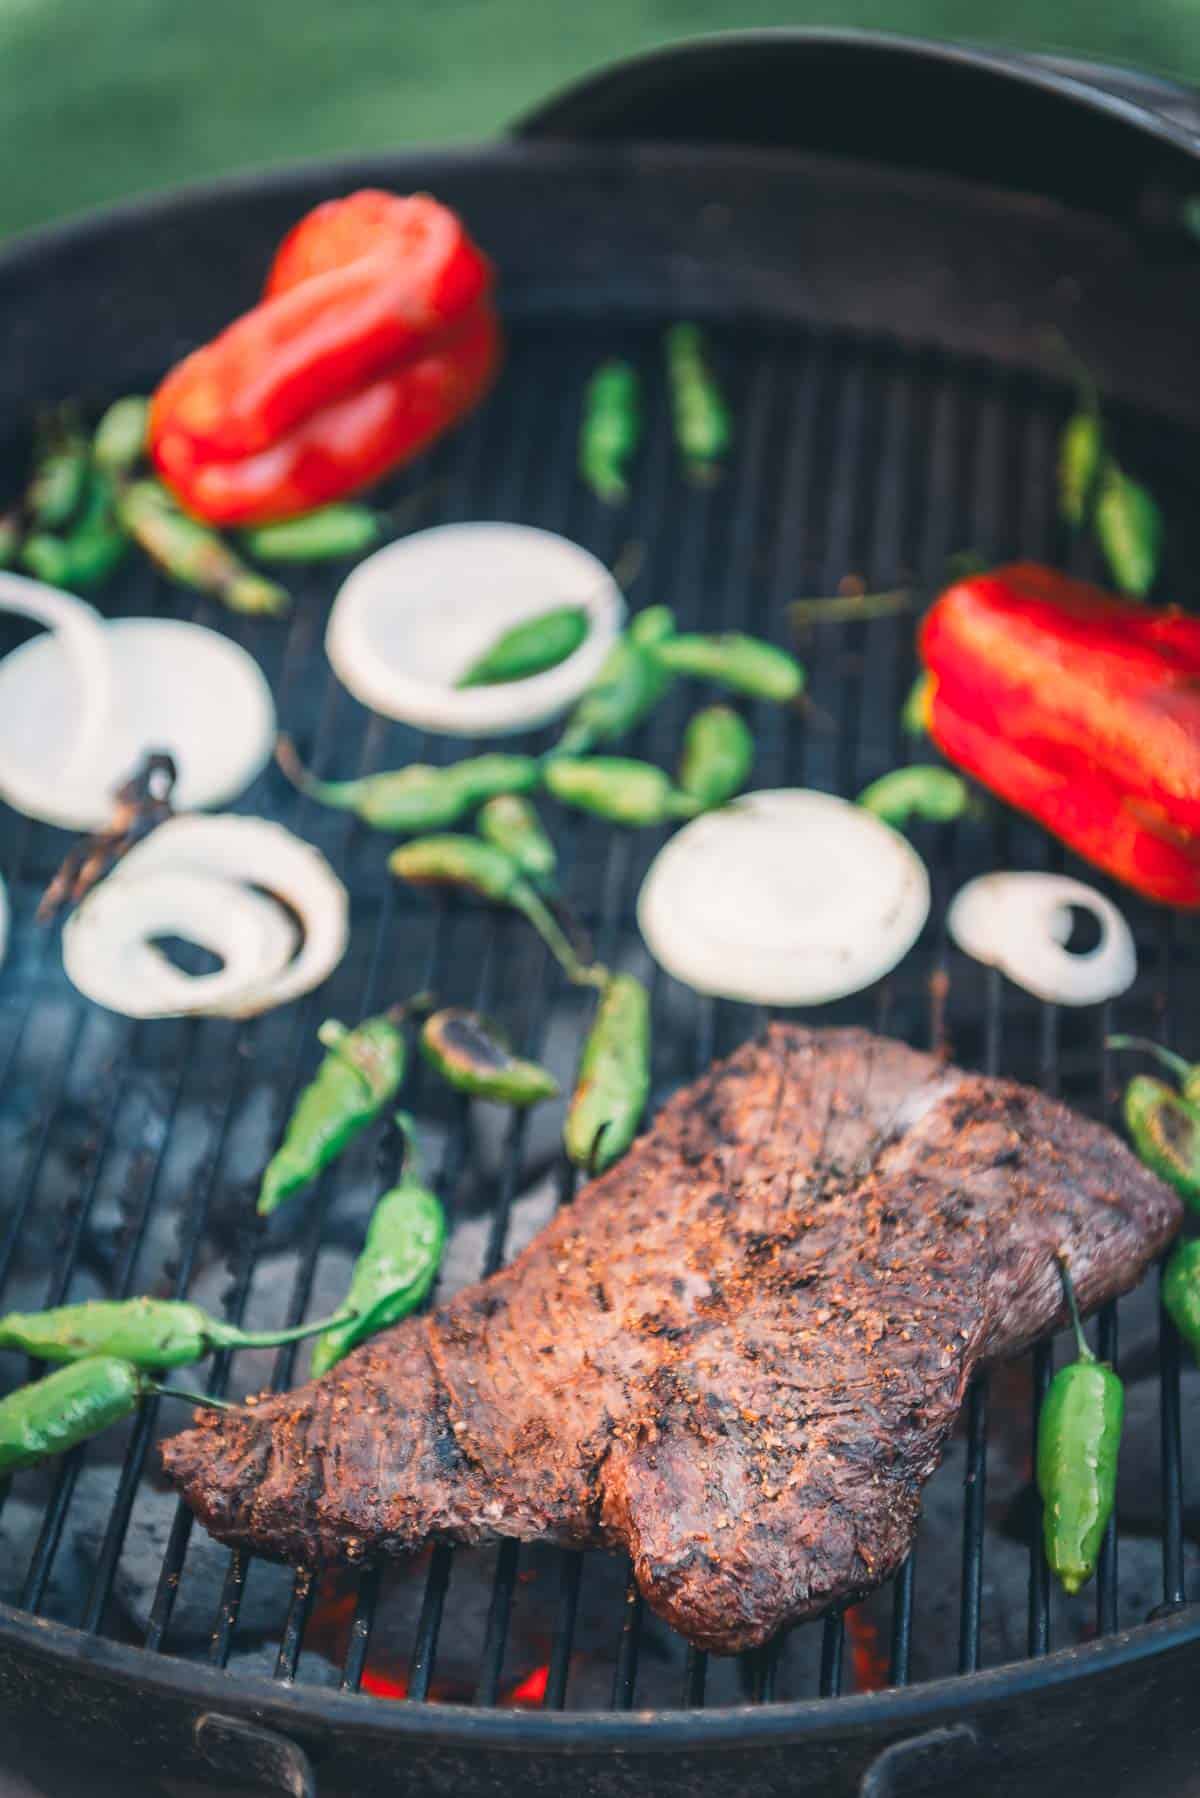 Hangers steak on a grill with peppers and onions.